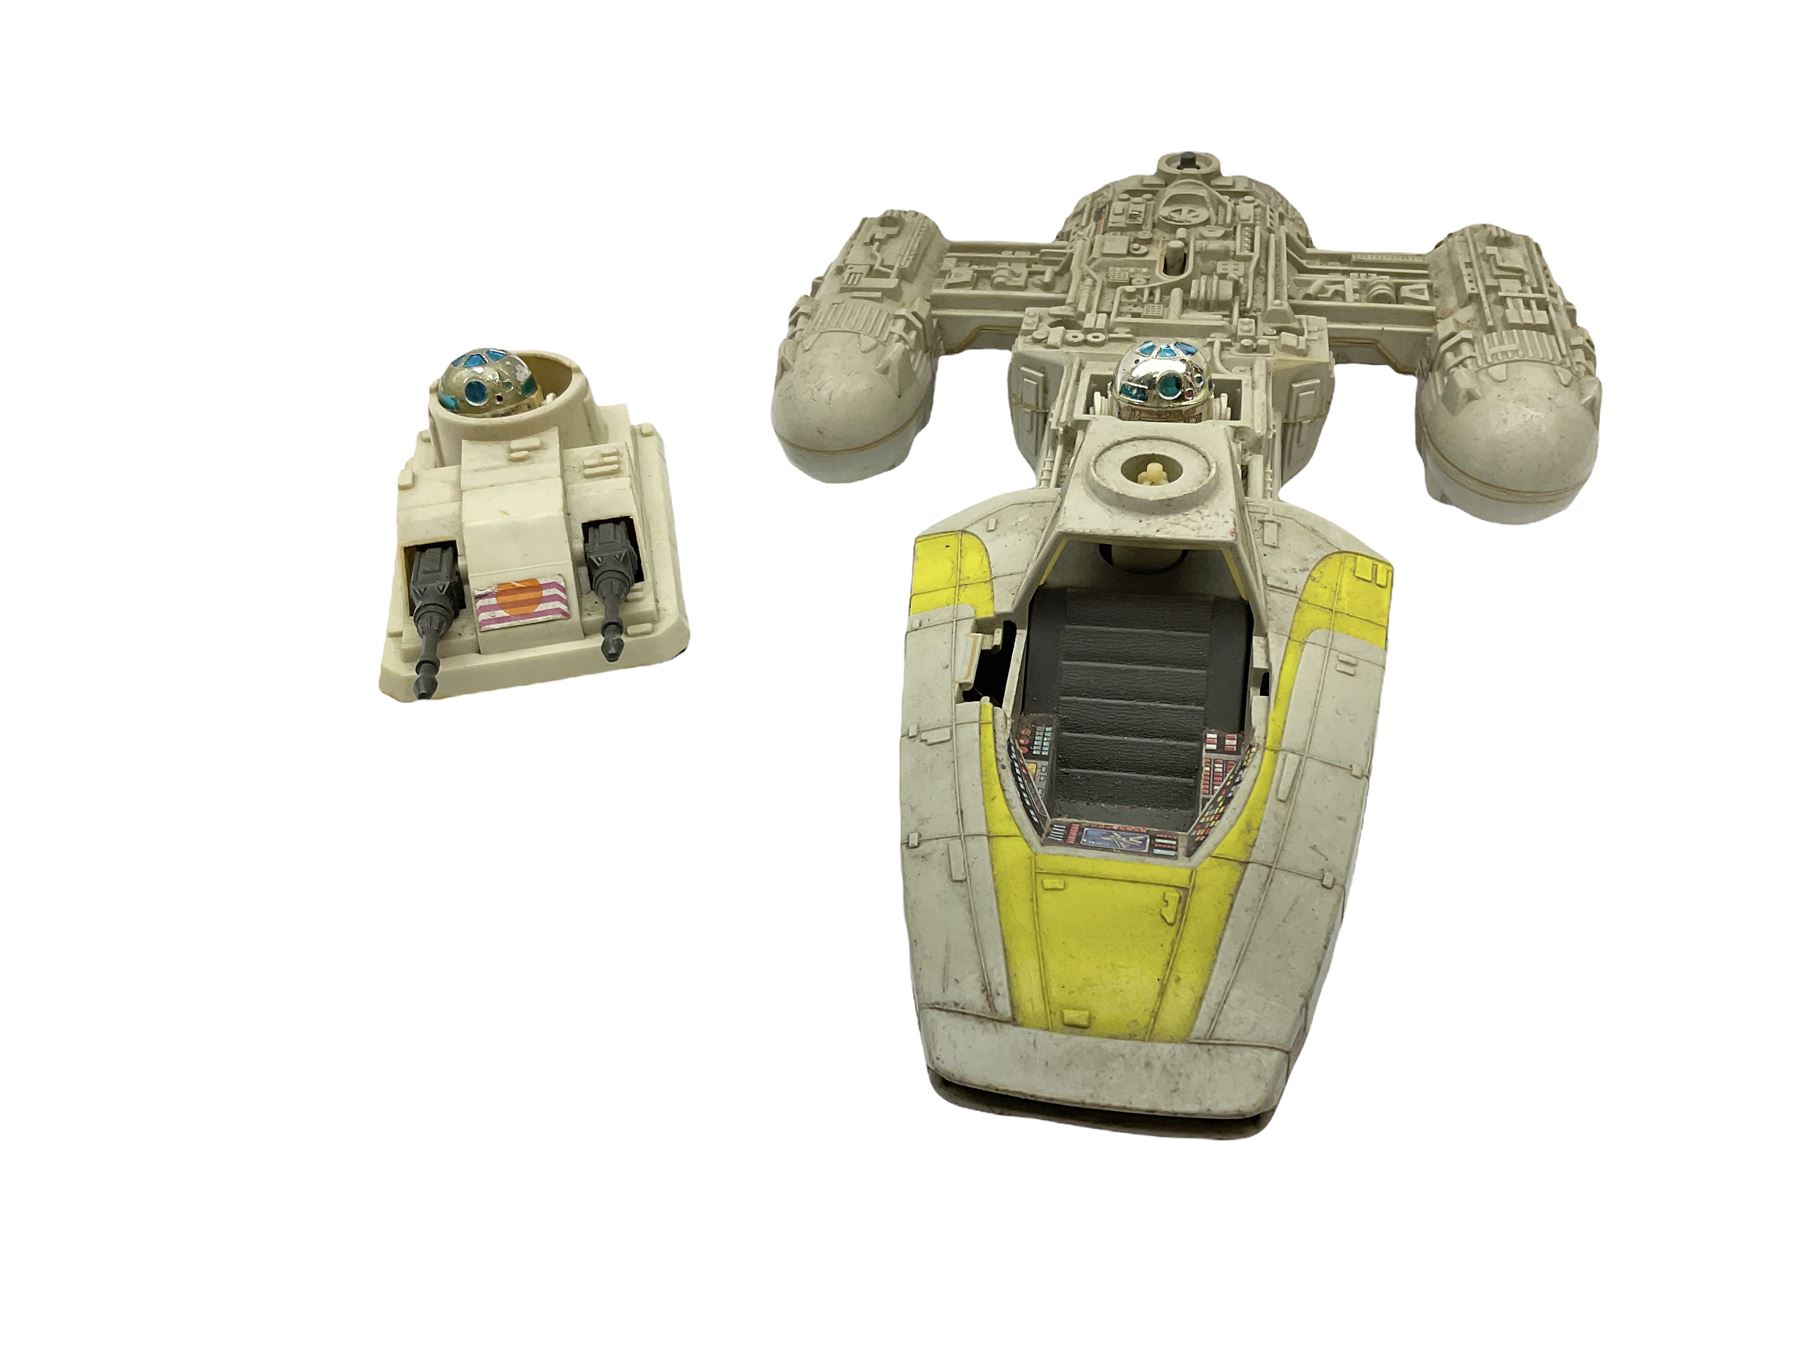 Star Wars - collection of various scale vehicles including two Millenium Falcons - Image 10 of 15